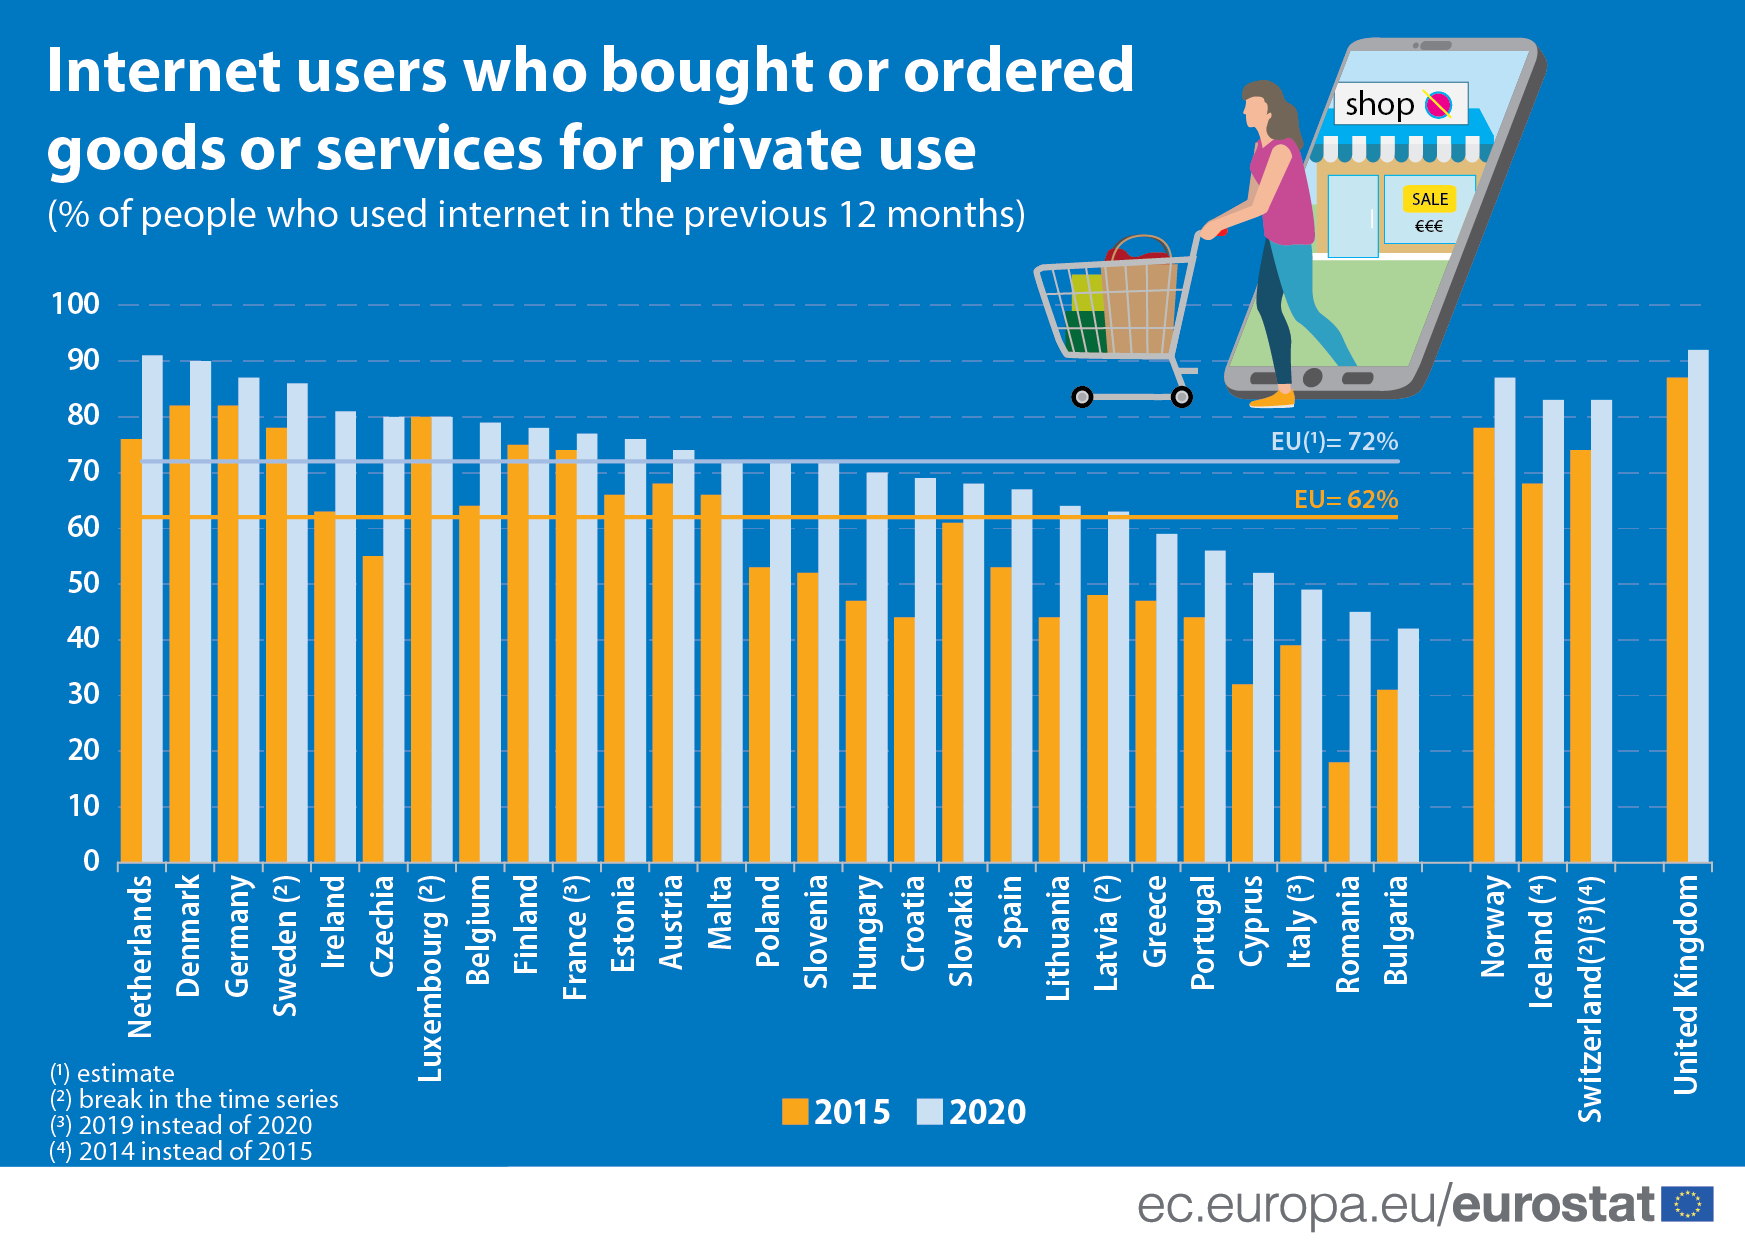 internet_users_who_bought_or_ordered_goods_or_services_for_private_use.png